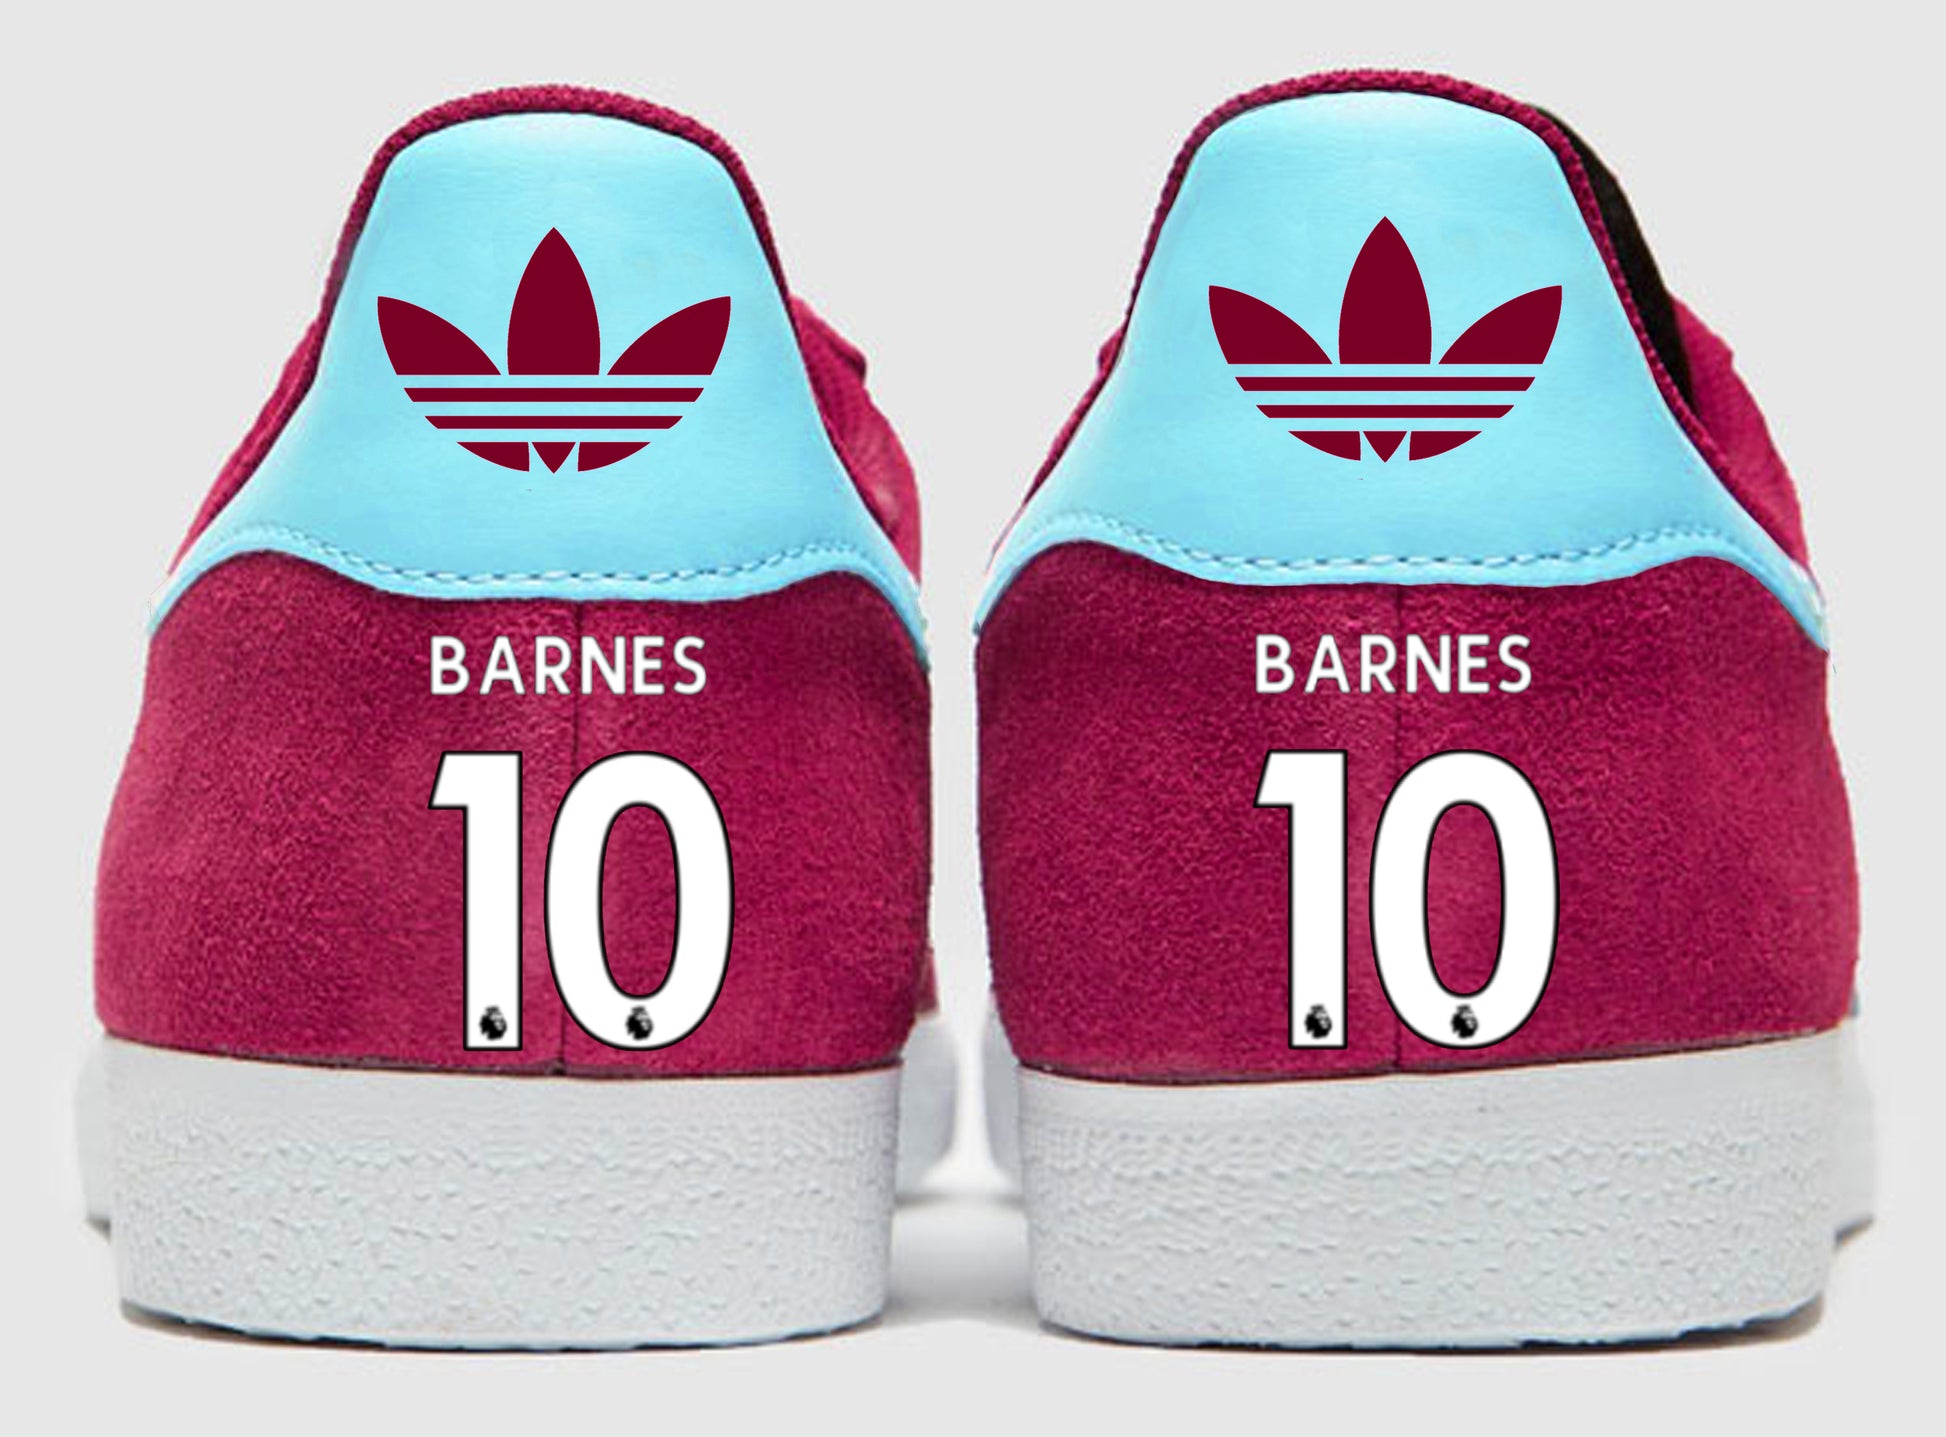 Geplooid Geschikt Controle Limited edition Burnley FC Ashley Barnes inspired Claret / blue / whit –  Sneakcustomtrainers.com